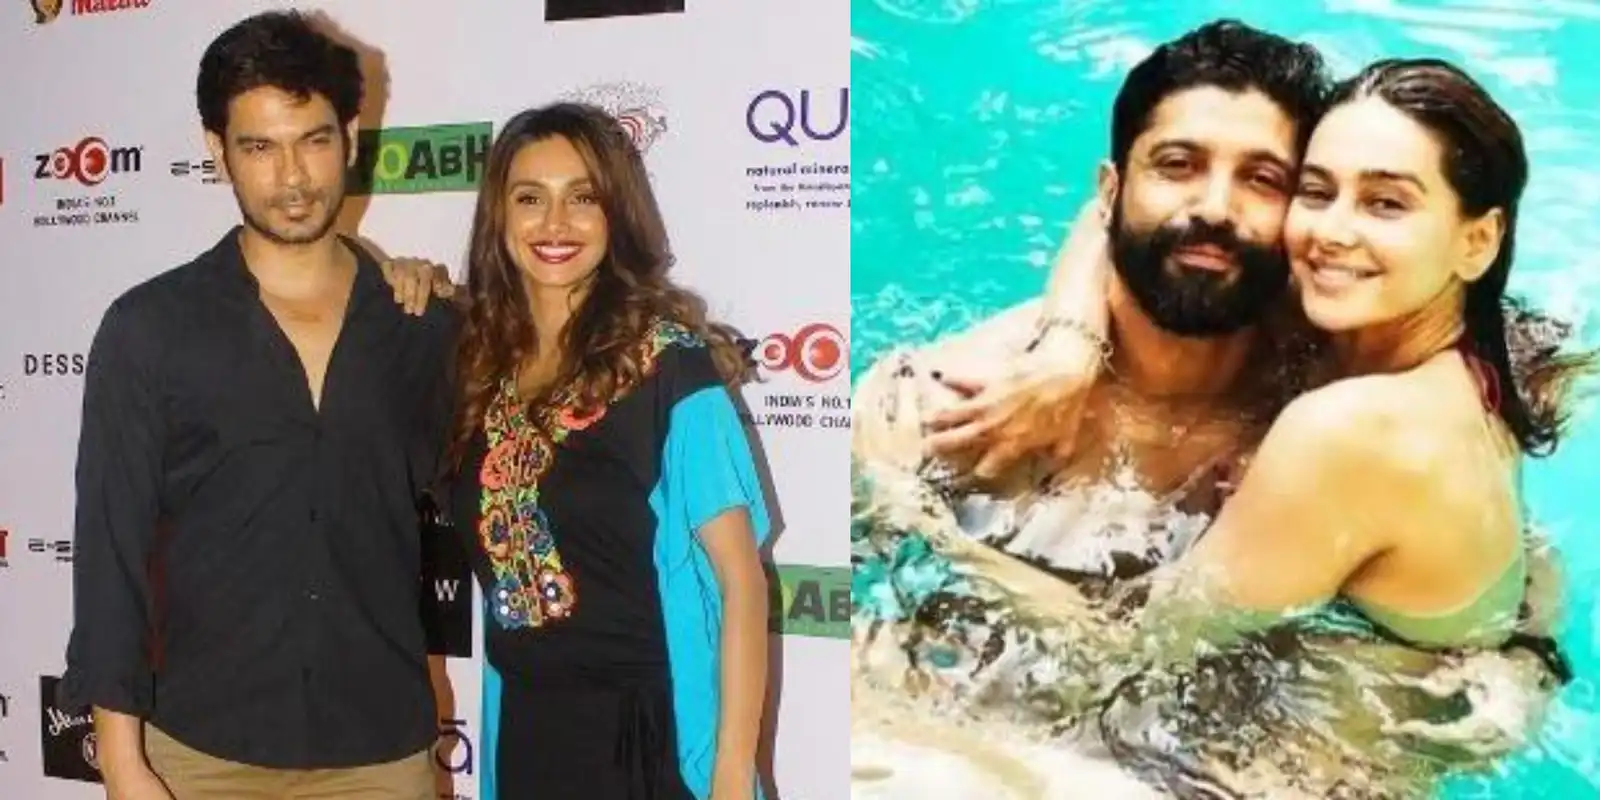 Did You Know That Shibani Dandekar Was Linked To These Men Before Dating Farhan Akhtar?